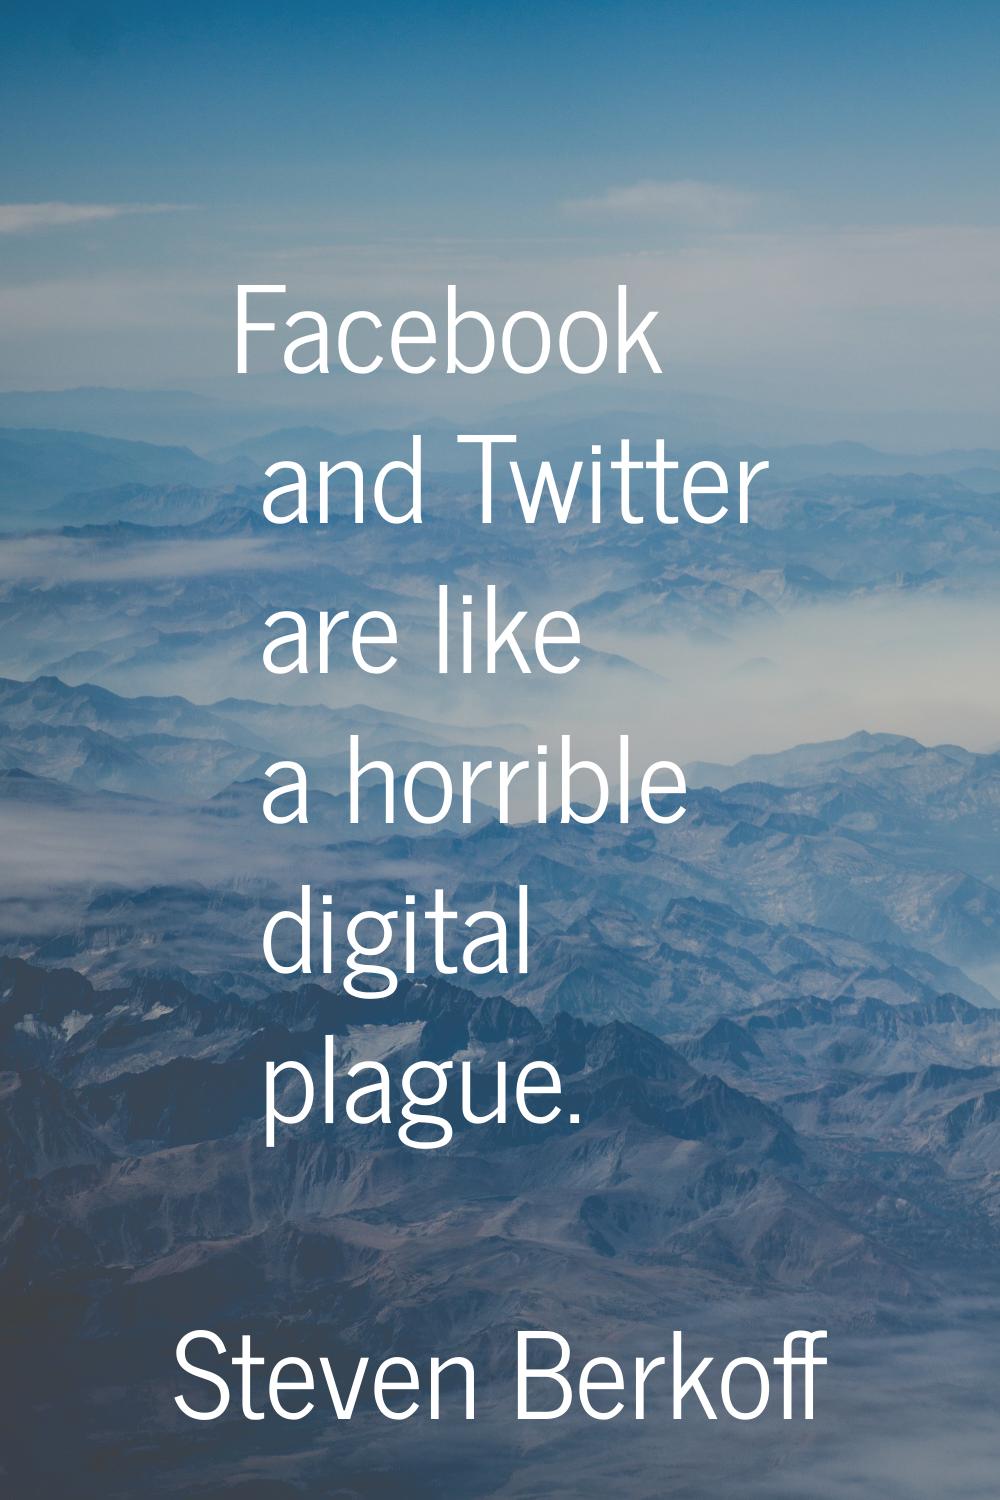 Facebook and Twitter are like a horrible digital plague.